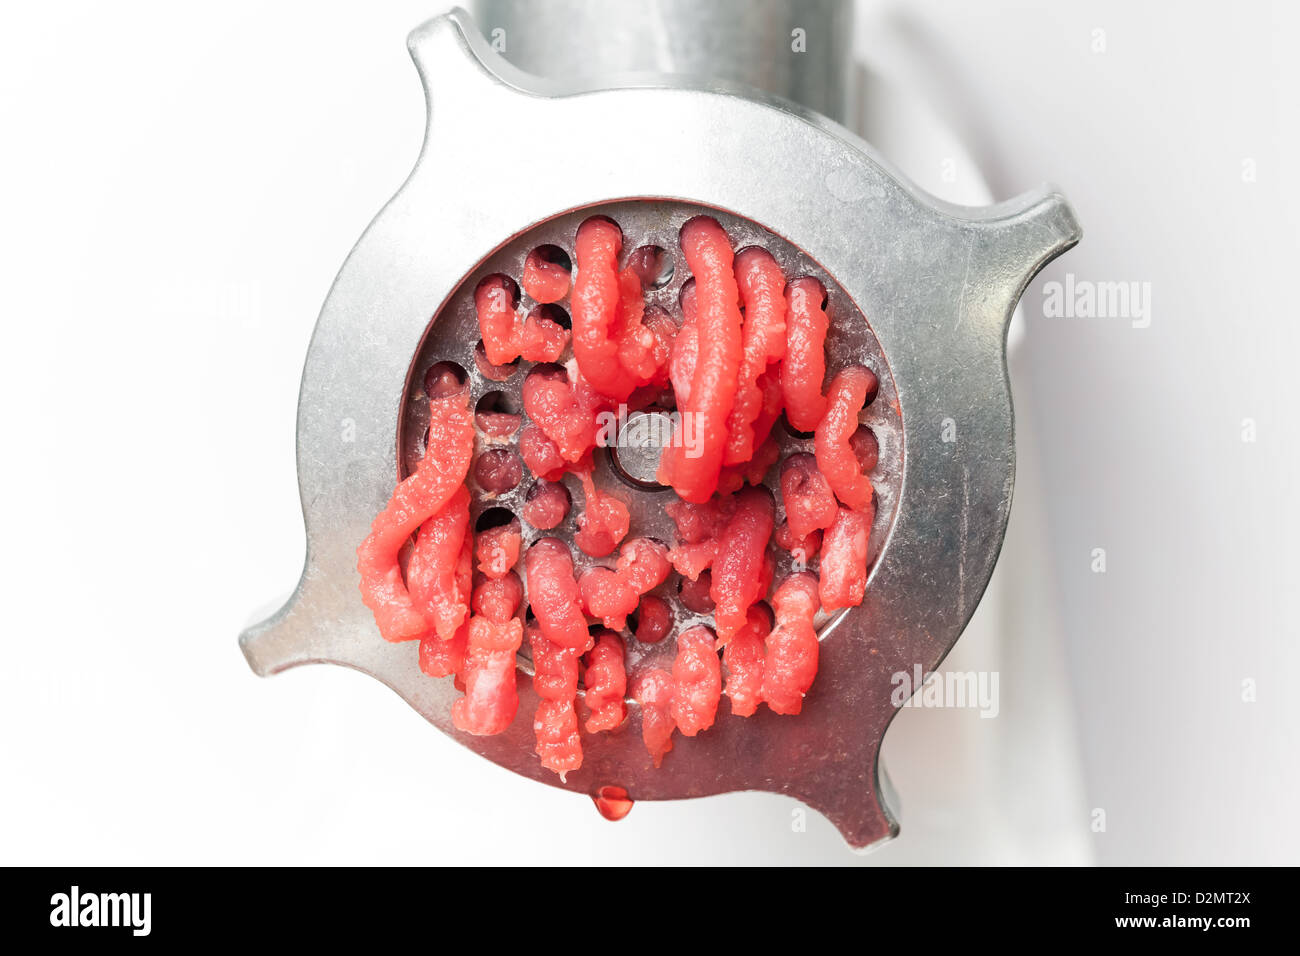 Closeup photo of mincer machine with fresh chopped meat Stock Photo